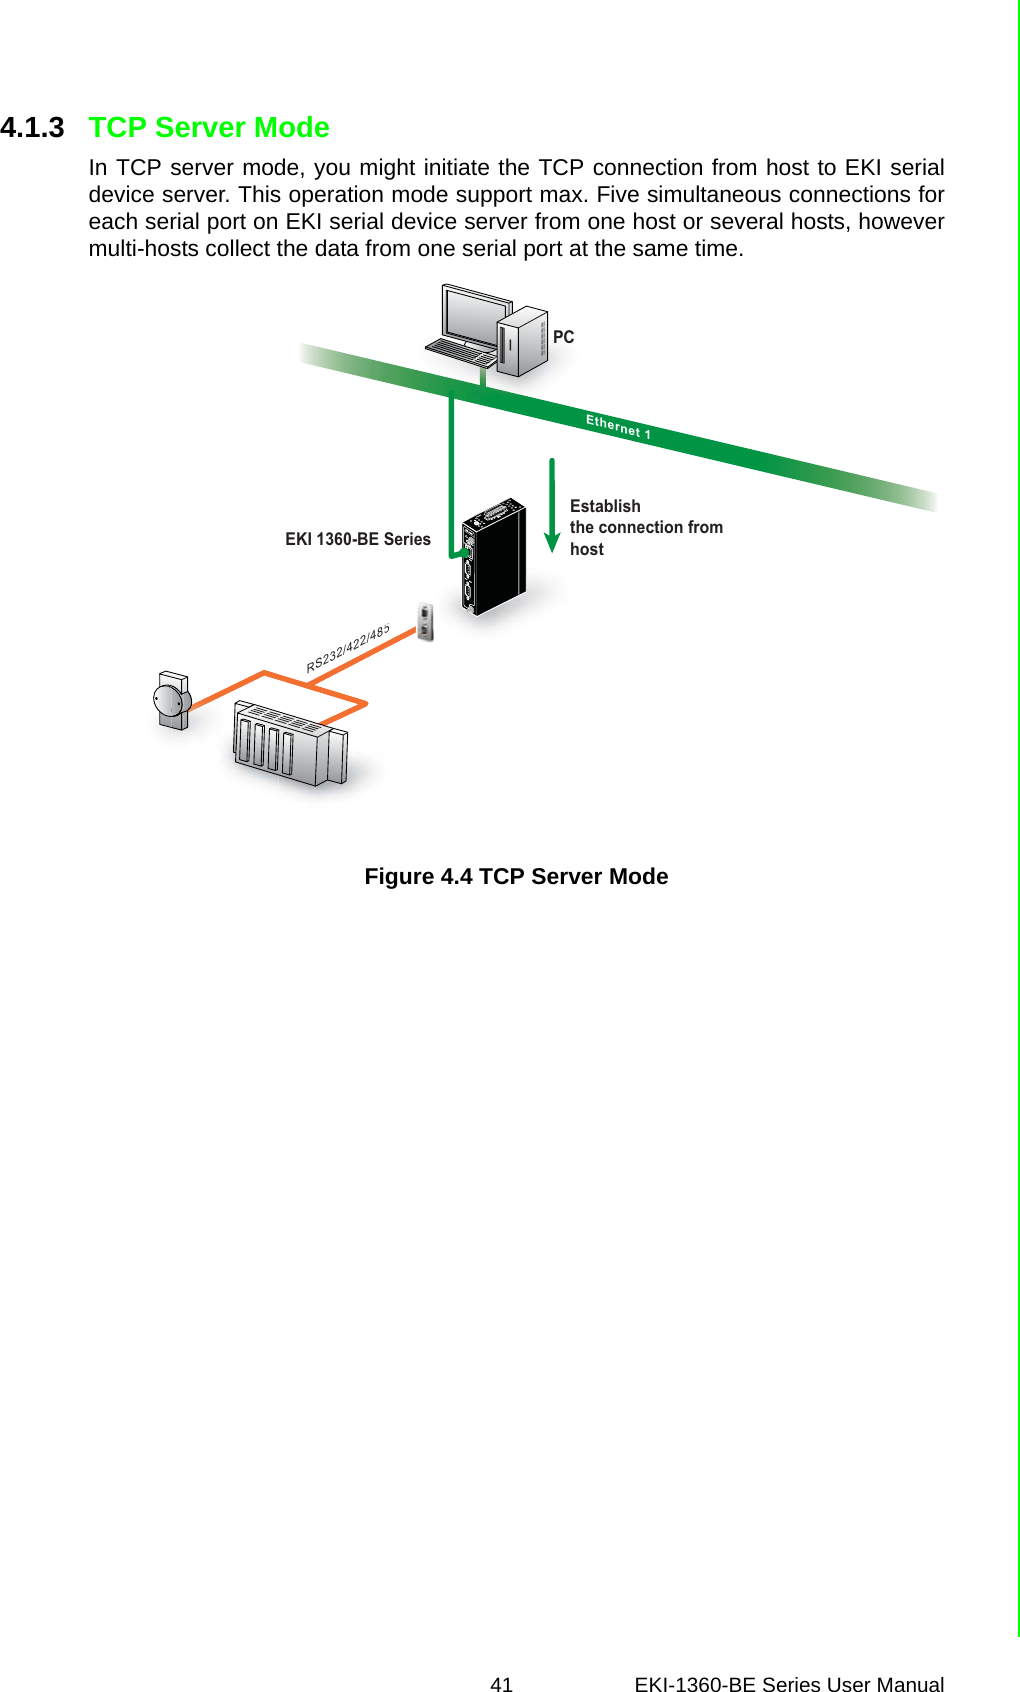 41 EKI-1360-BE Series User Manual 4.1.3 TCP Server ModeIn TCP server mode, you might initiate the TCP connection from host to EKI serialdevice server. This operation mode support max. Five simultaneous connections foreach serial port on EKI serial device server from one host or several hosts, howevermulti-hosts collect the data from one serial port at the same time.Figure 4.4 TCP Server Mode12Ethernet 1RS232/422/485Ethernet 25EKI 1360-BE SeriesEstablish the connection from hostResetWLANPC